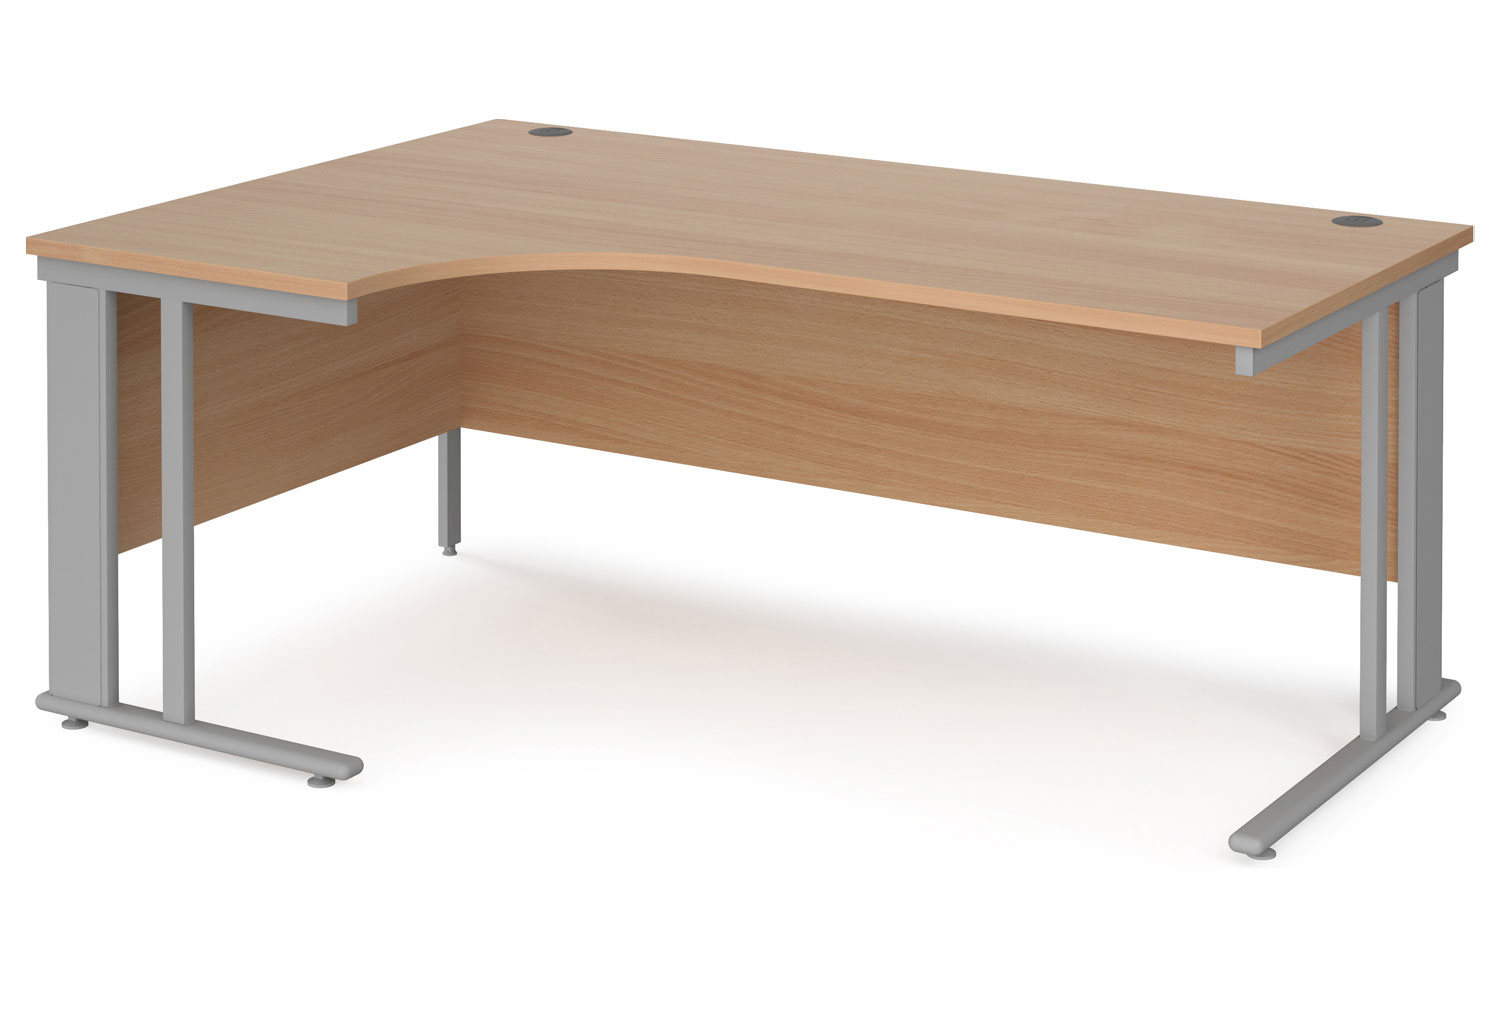 Value Line Deluxe Cable Managed Left Hand Ergo Office Desk (Silver Legs), 180wx120/80dx73h (cm), Beech, Express Delivery